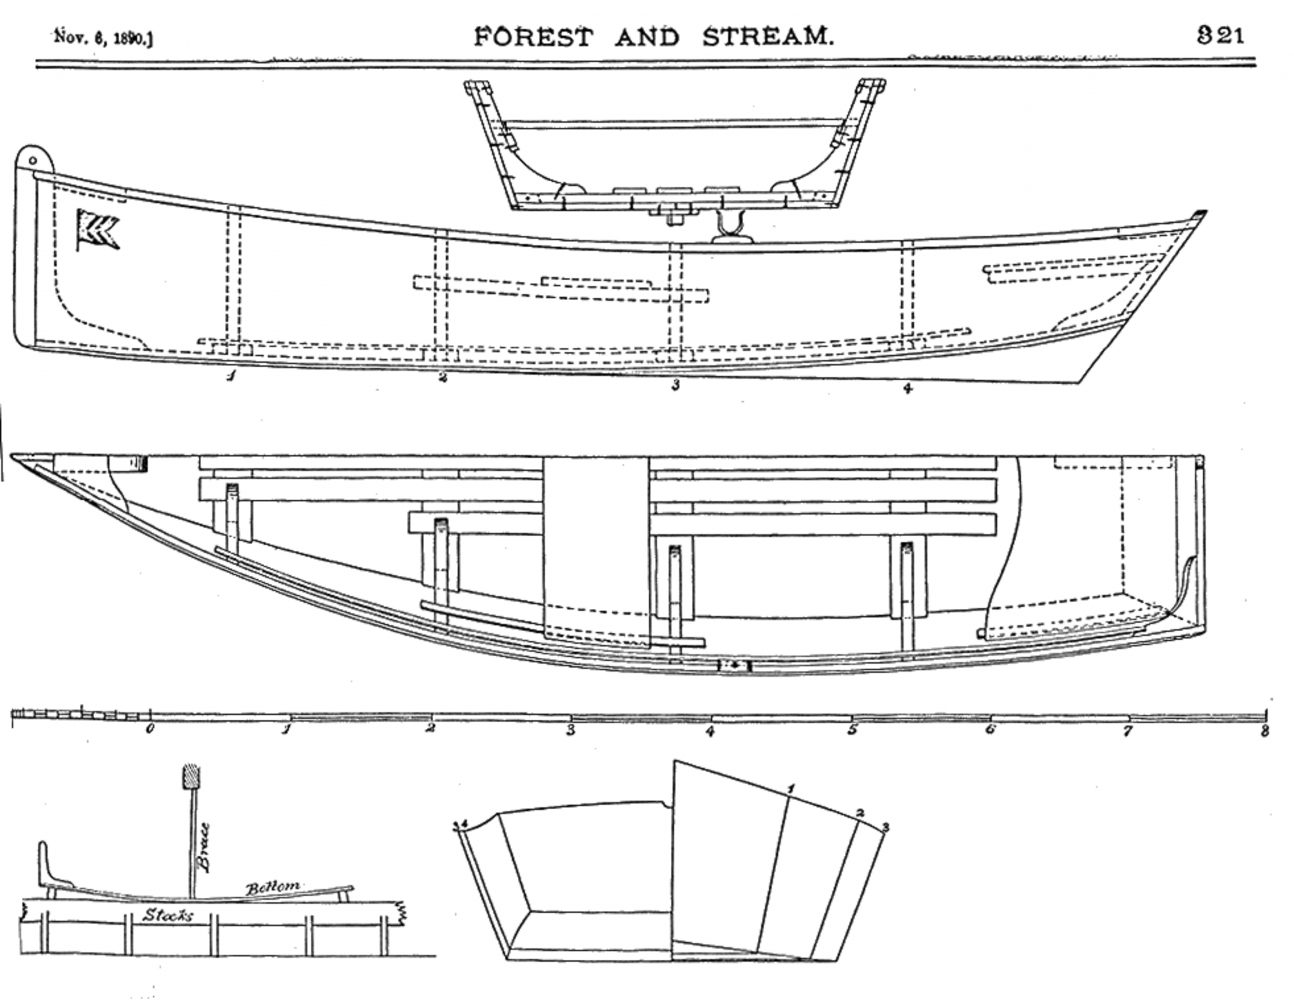 Forest-and-Stream-Skiff-1890.jpg